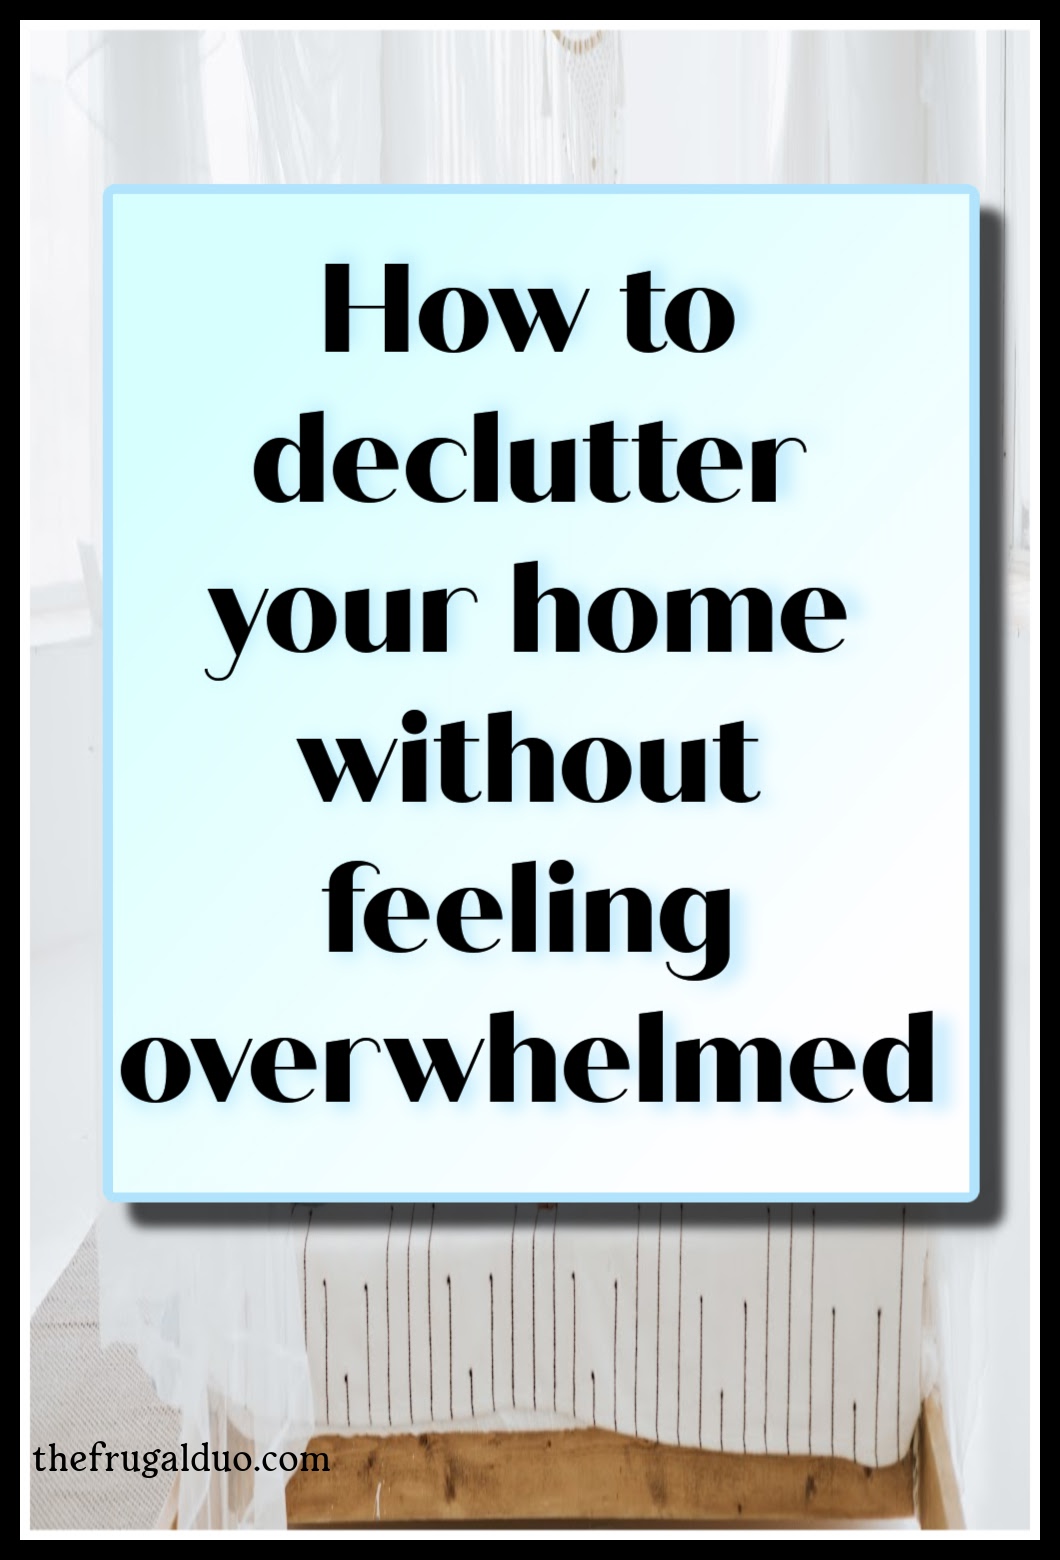 How to Declutter Your Home and Find Serenity